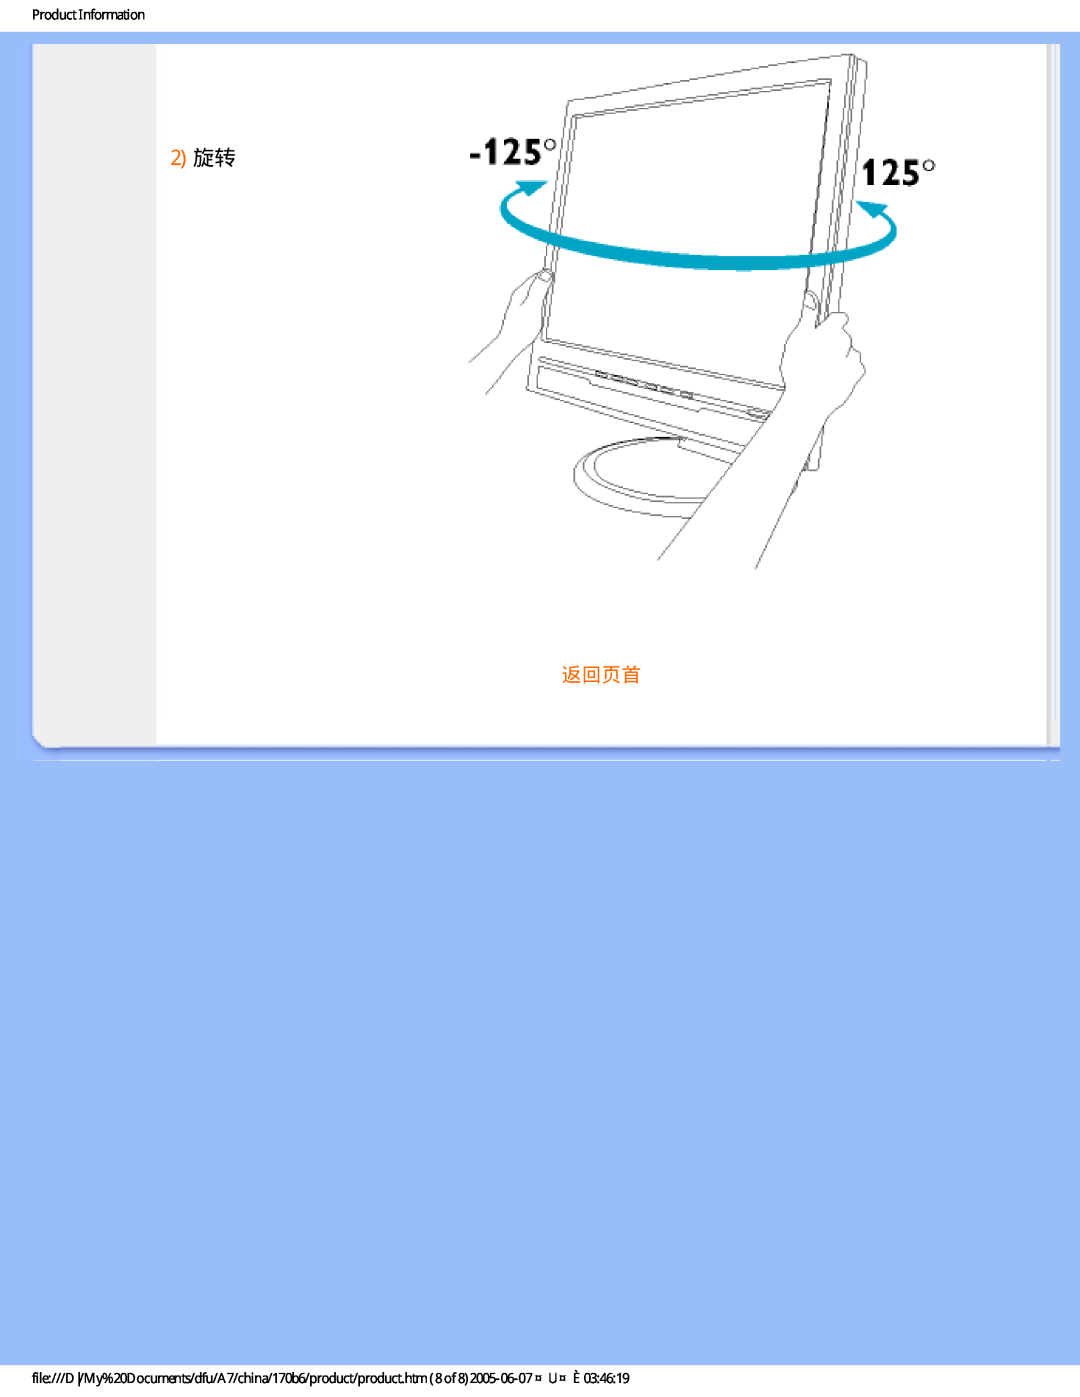 Philips 170B6 user manual 返回页首, Product Information 